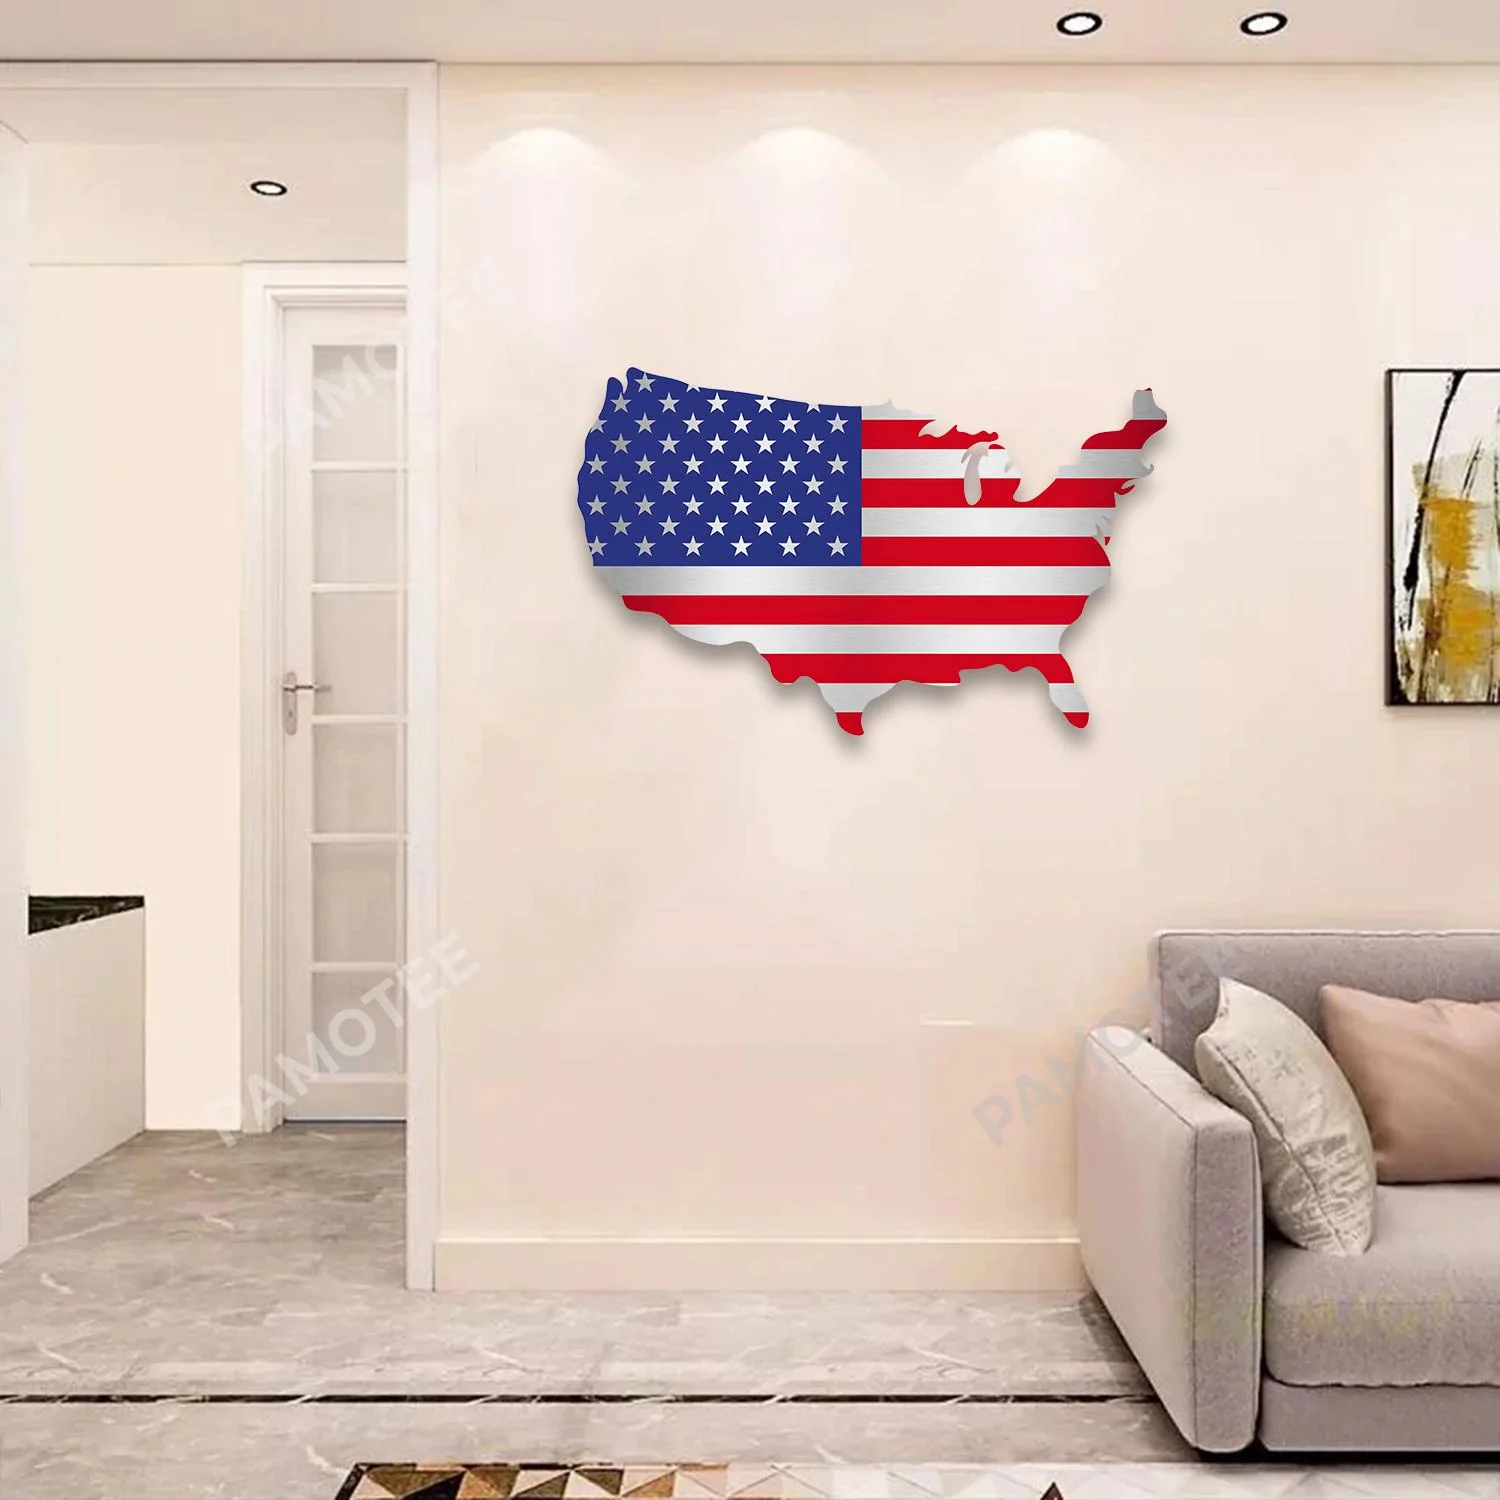 America Map With American Flag Pattern Metal Art, Independence Day Home Artwork